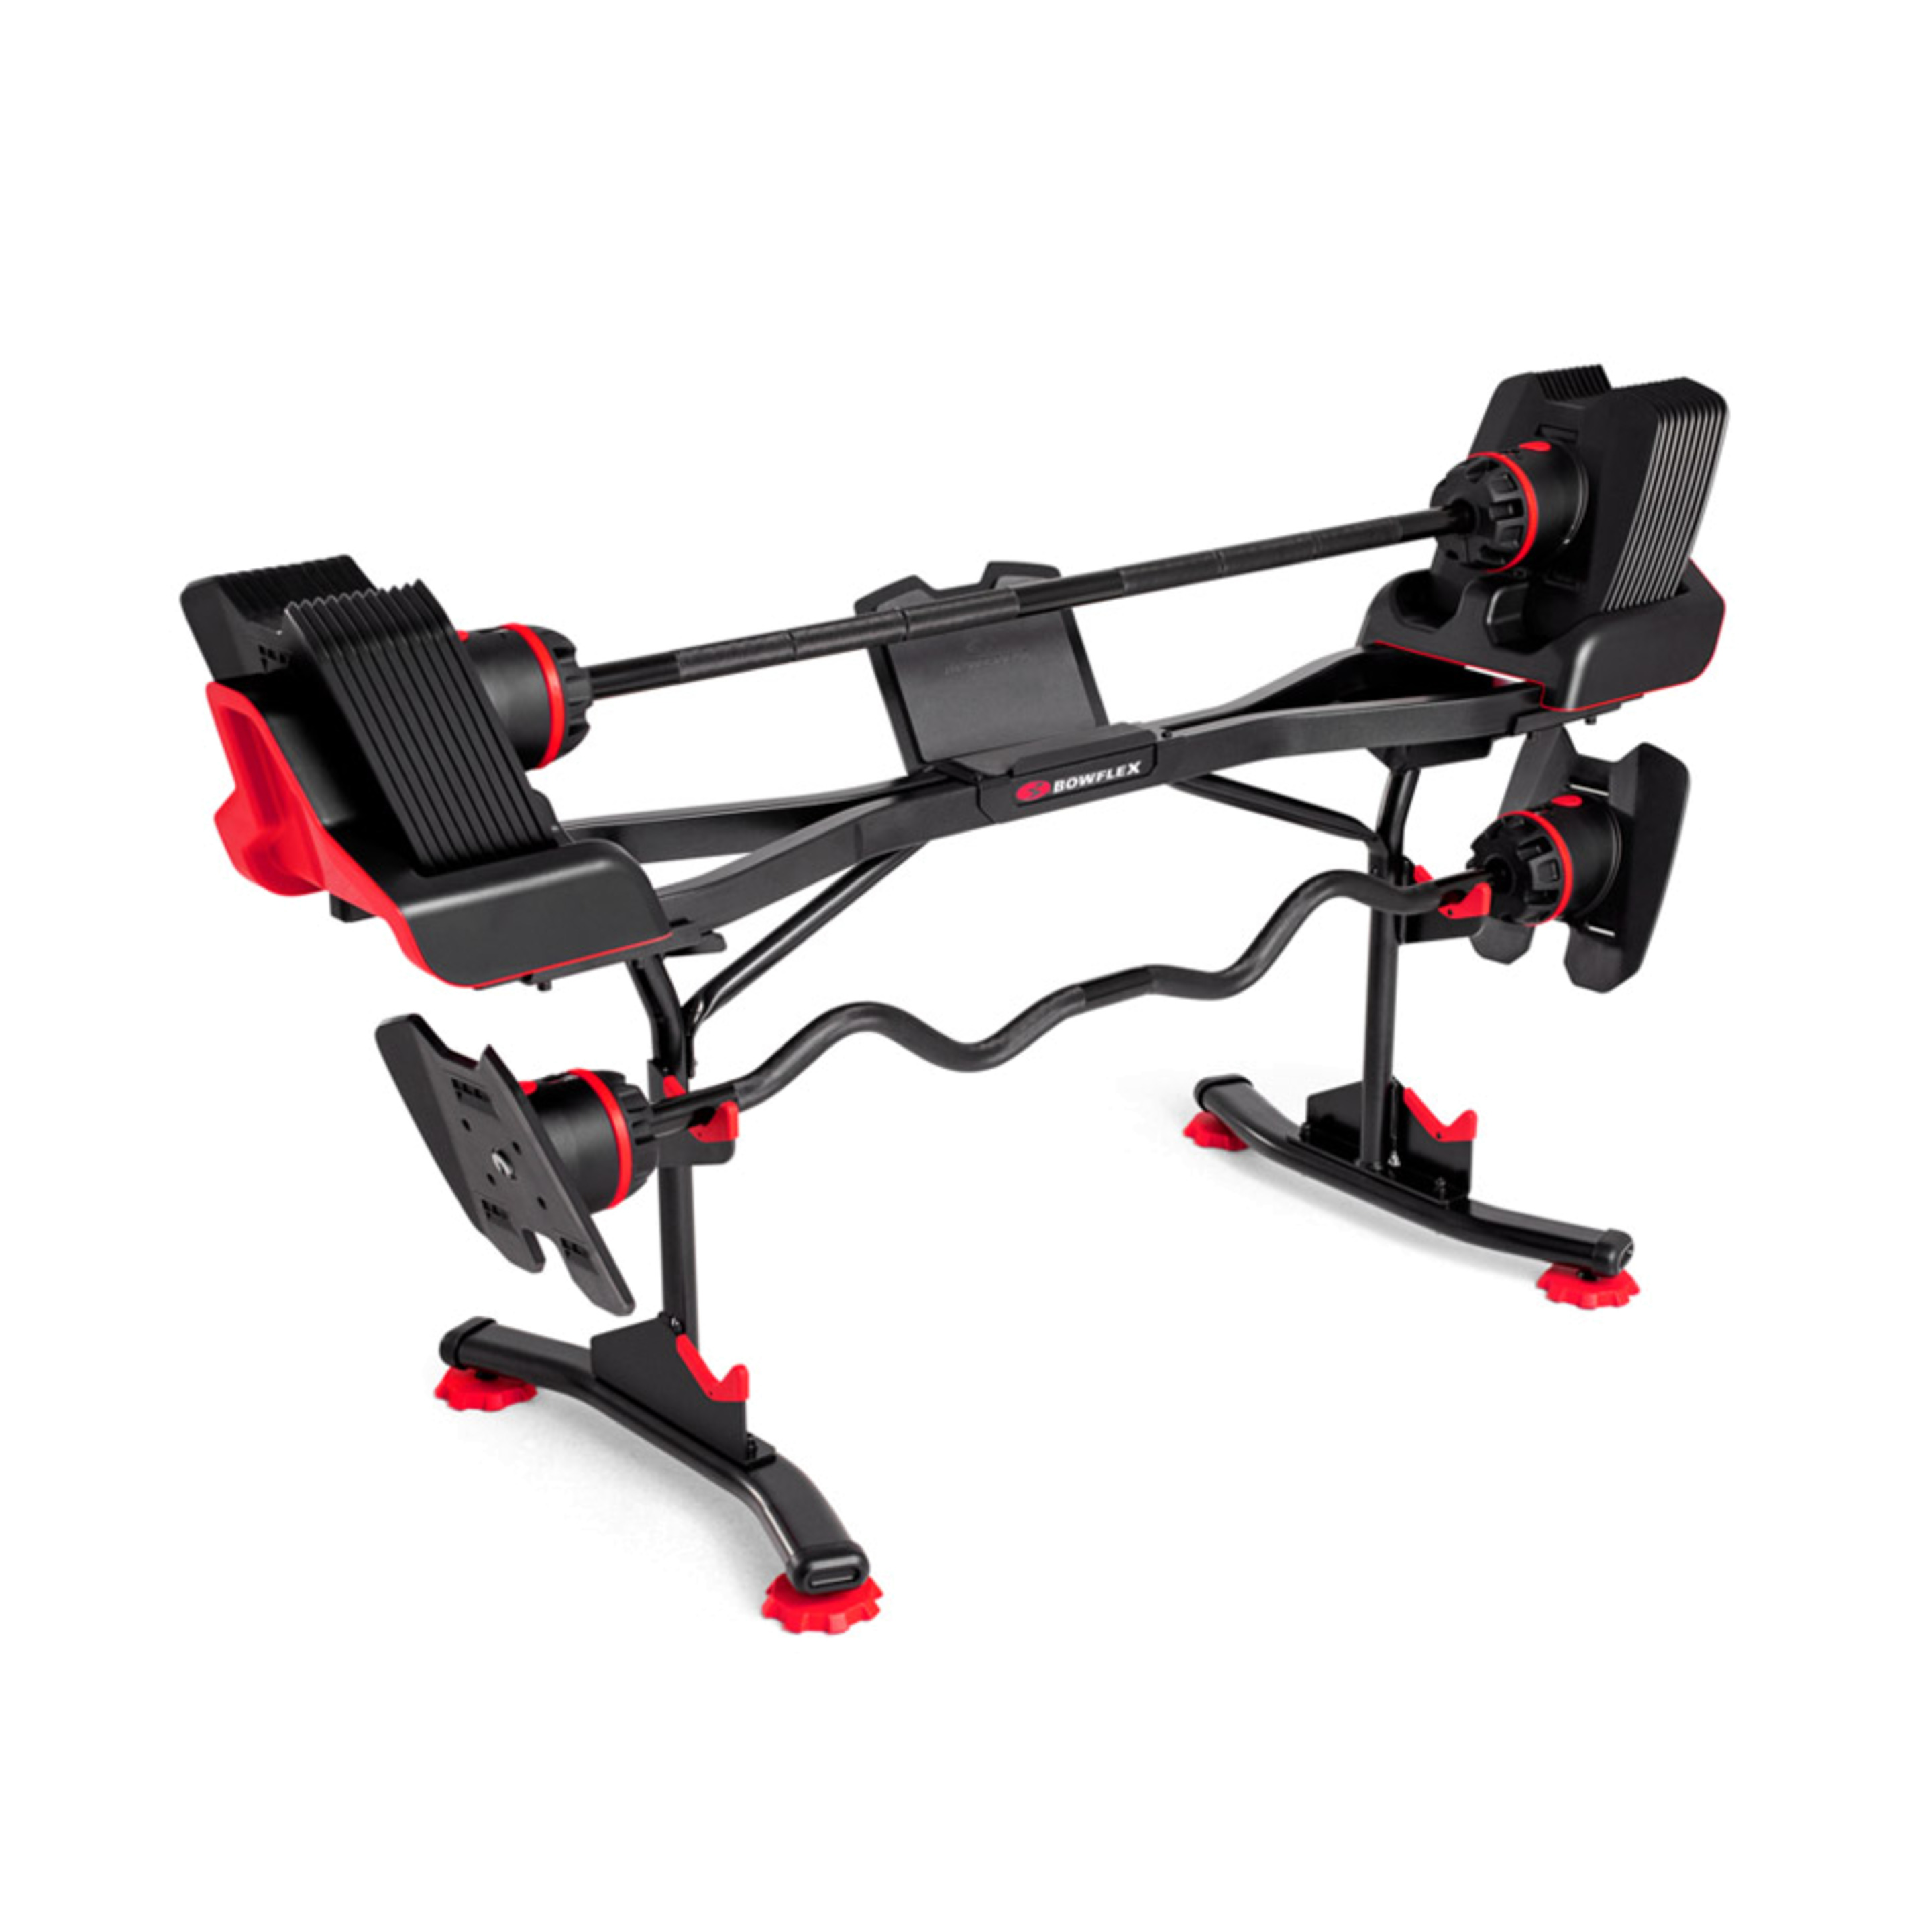 Bowflex Stand Barbell And Curlbar With Media Rack - Negro - Uso Doméstico  MKP